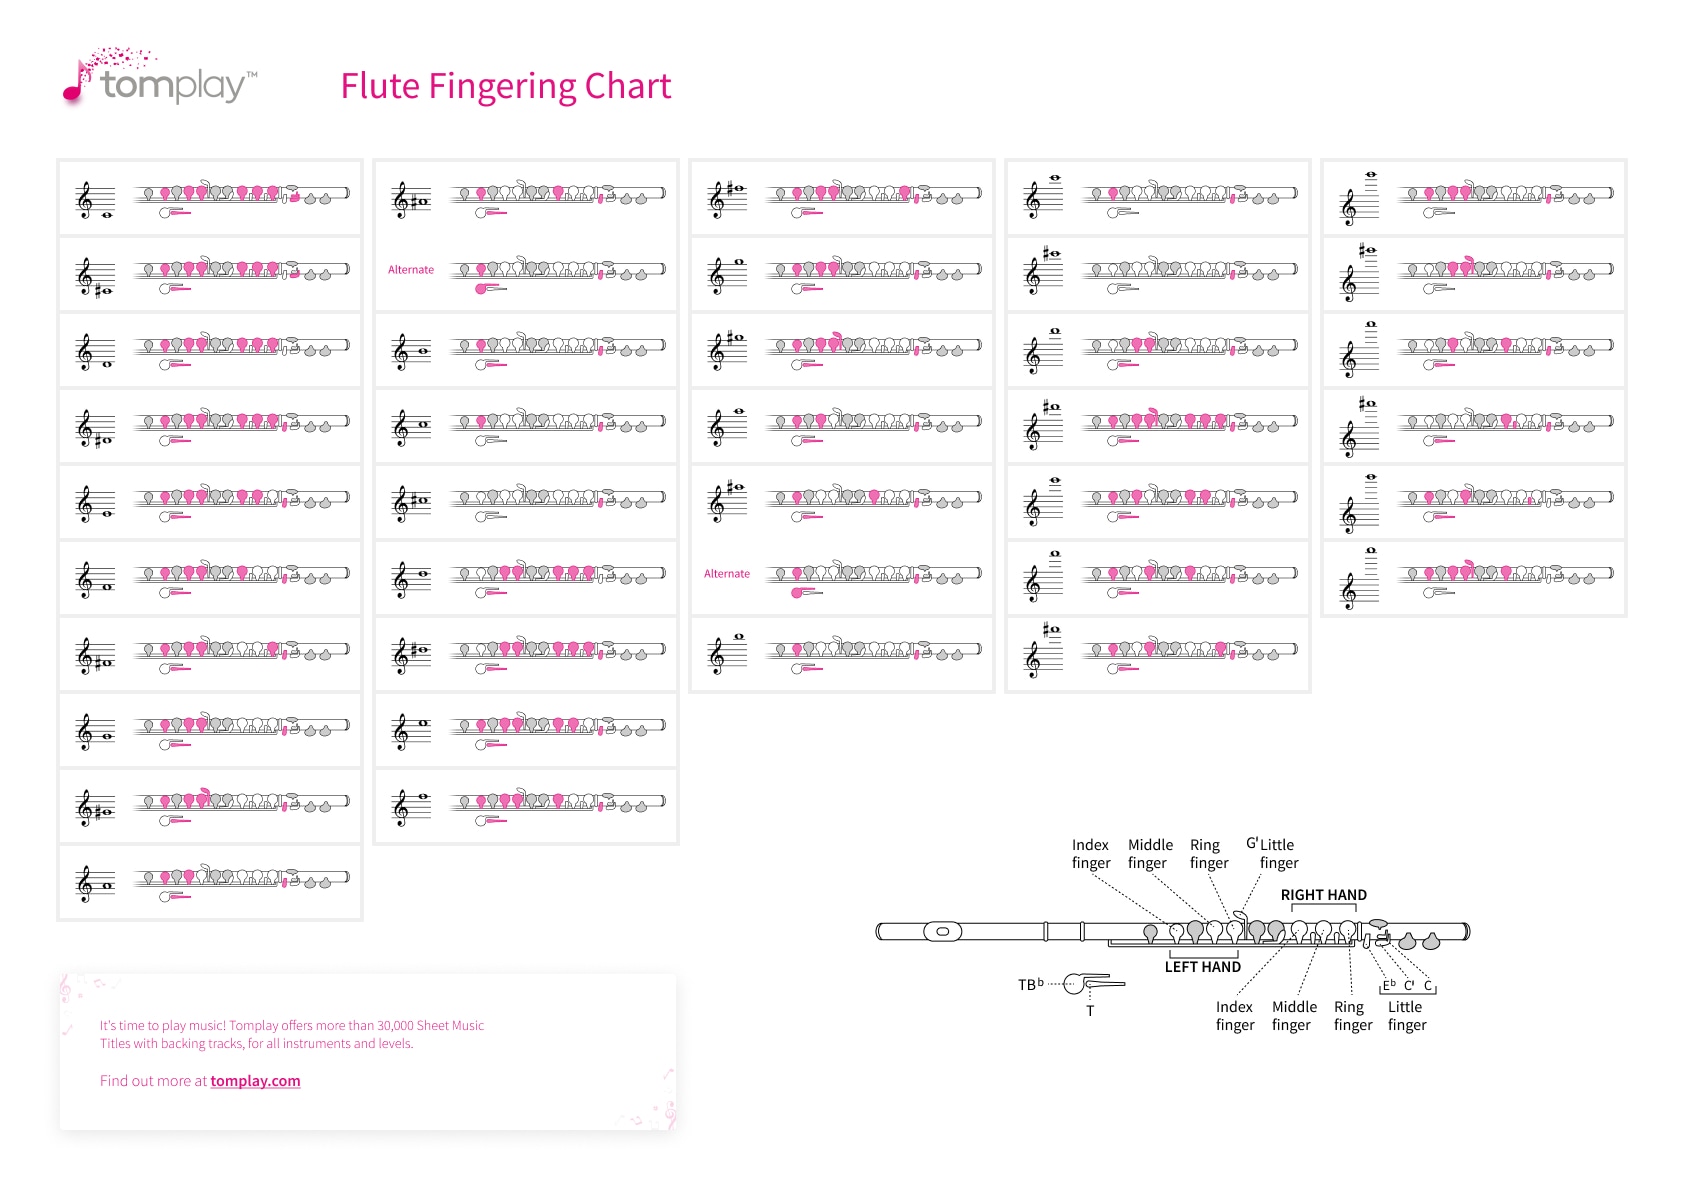 flute-fingering-chart-interactive-tool-for-all-flute-players